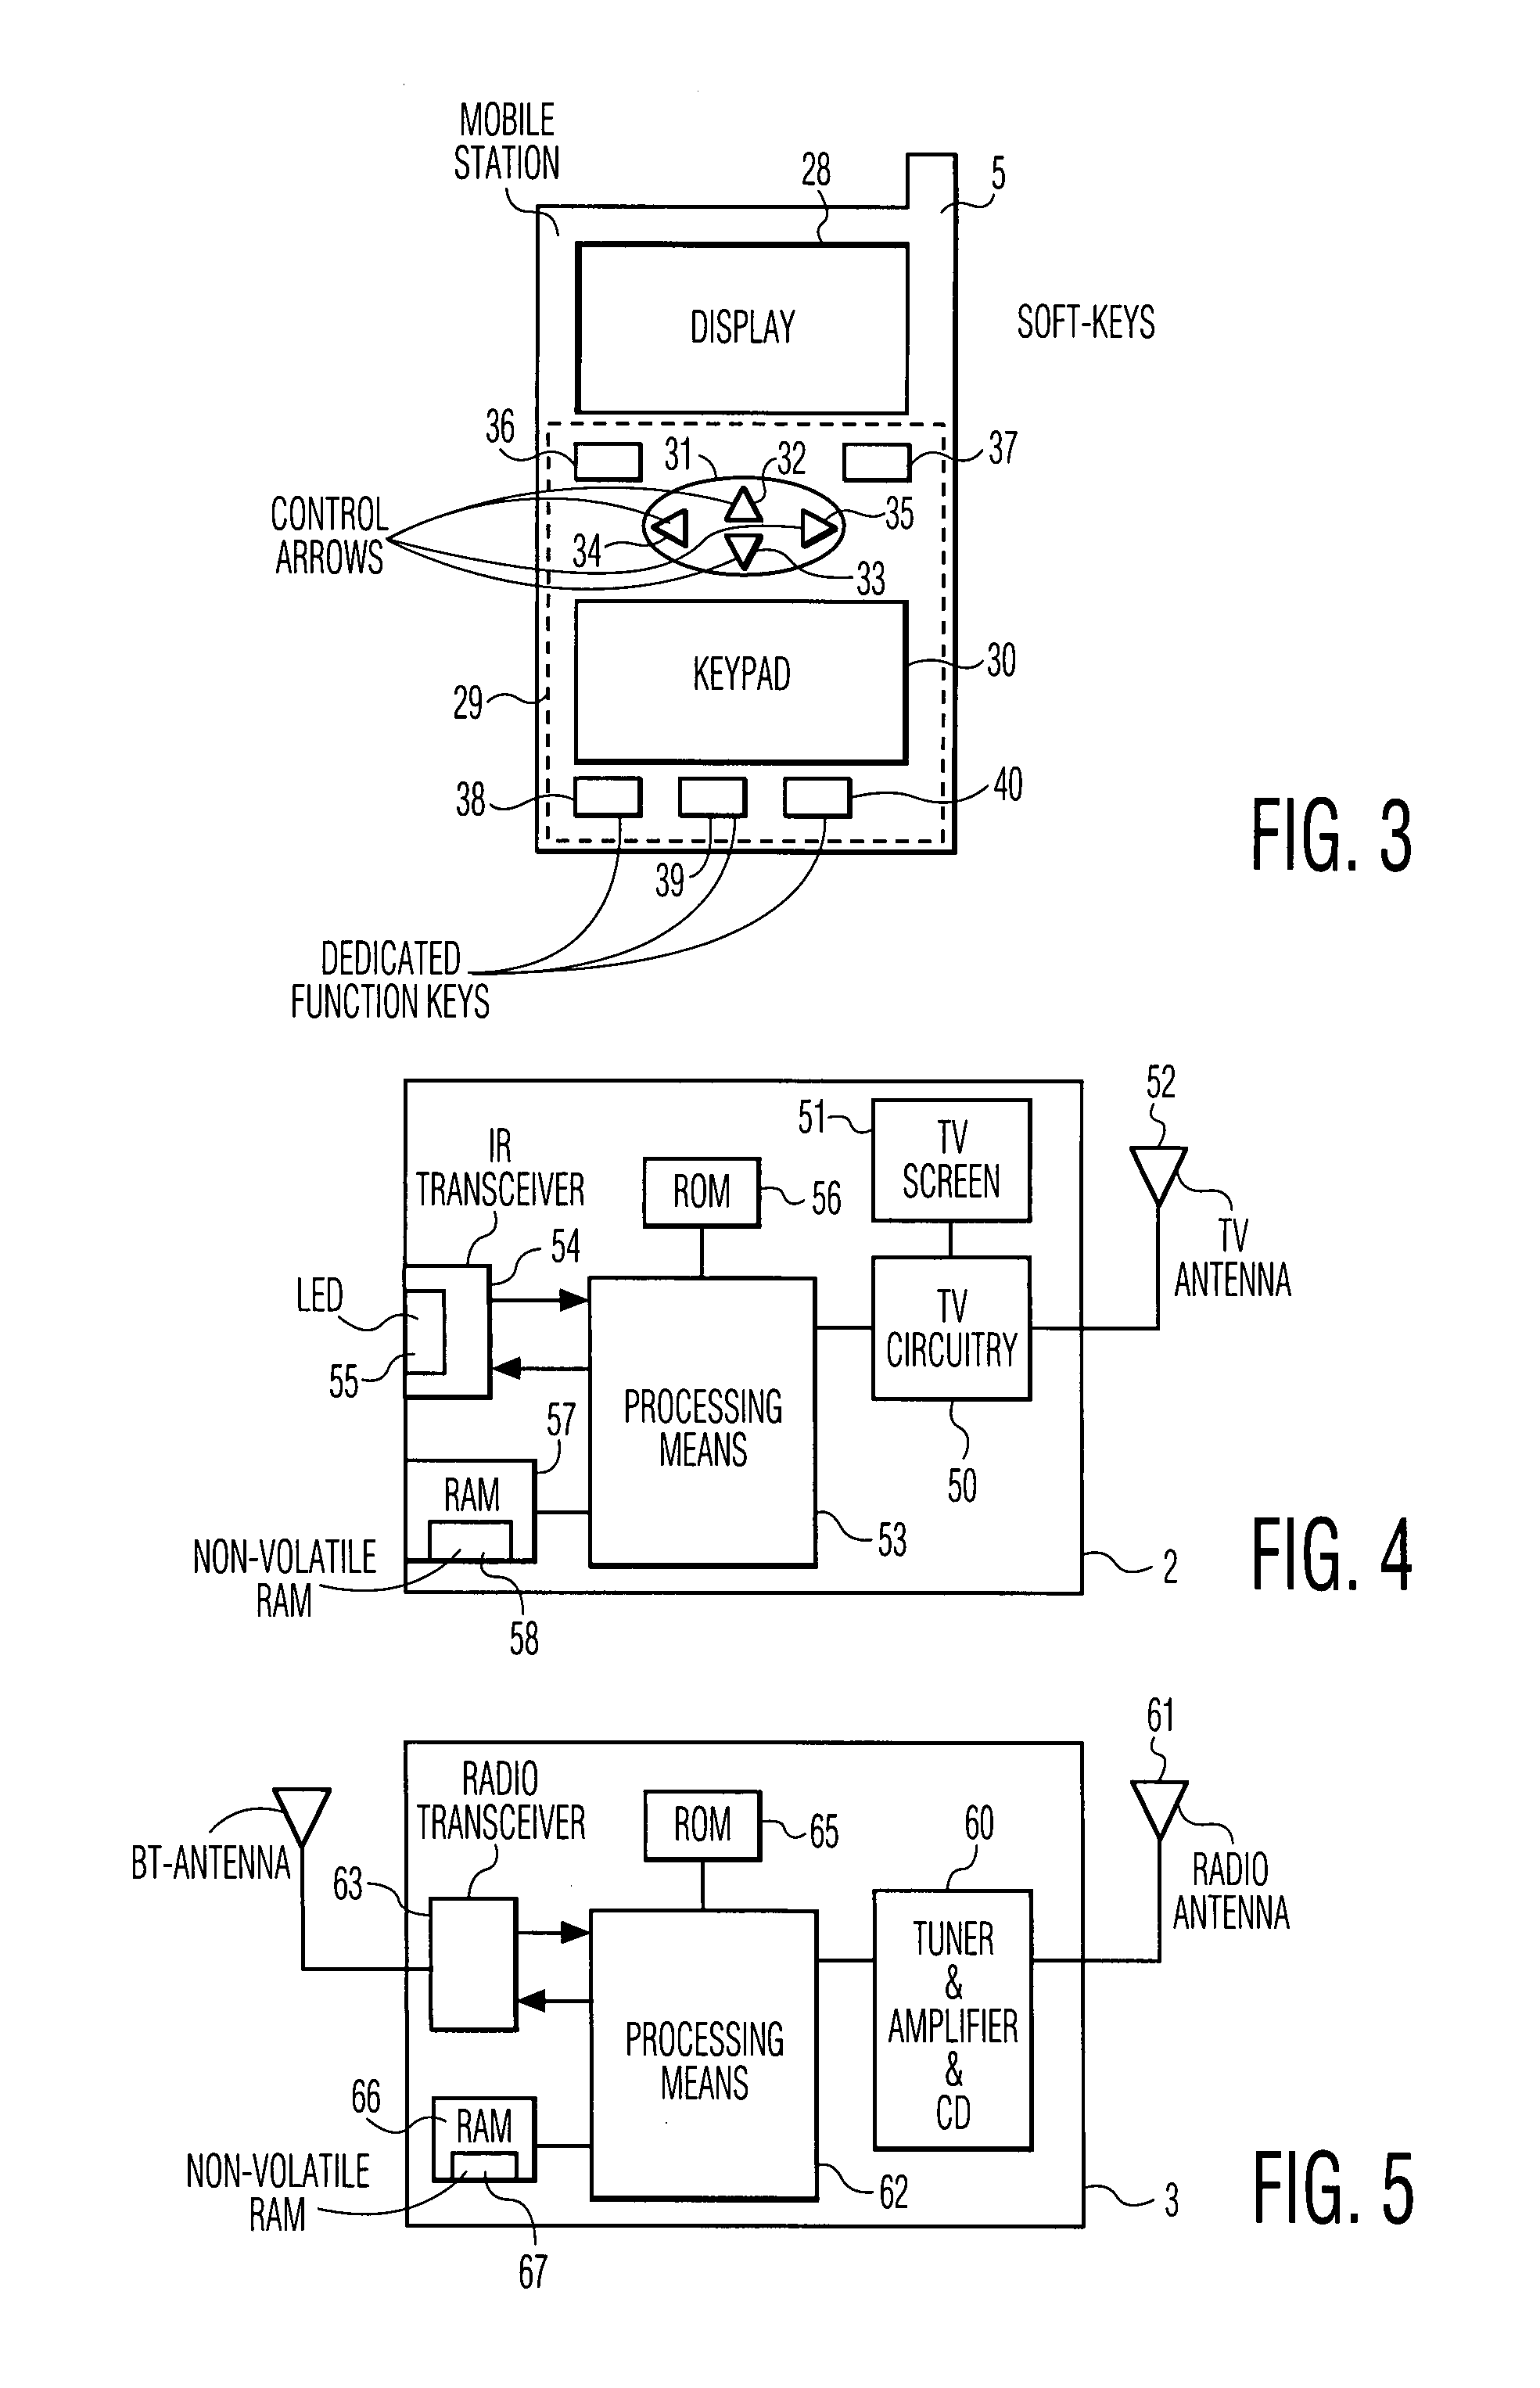 Remote control of an electronic device through downloading of a control interface of the electronic device in a mobile station